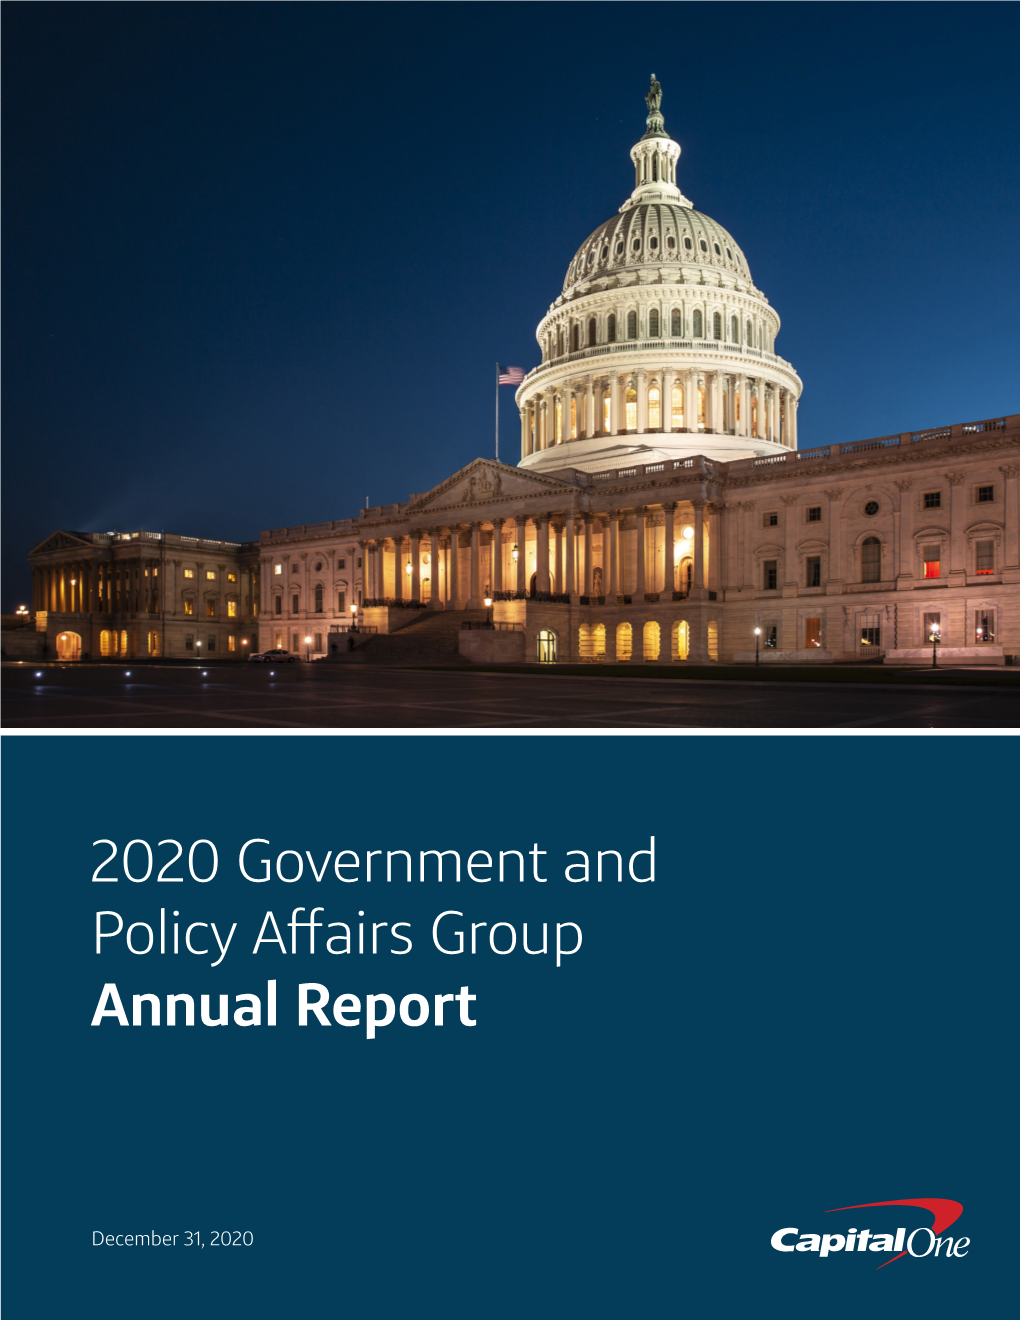 2020 Government and Policy Affairs Group Annual Report